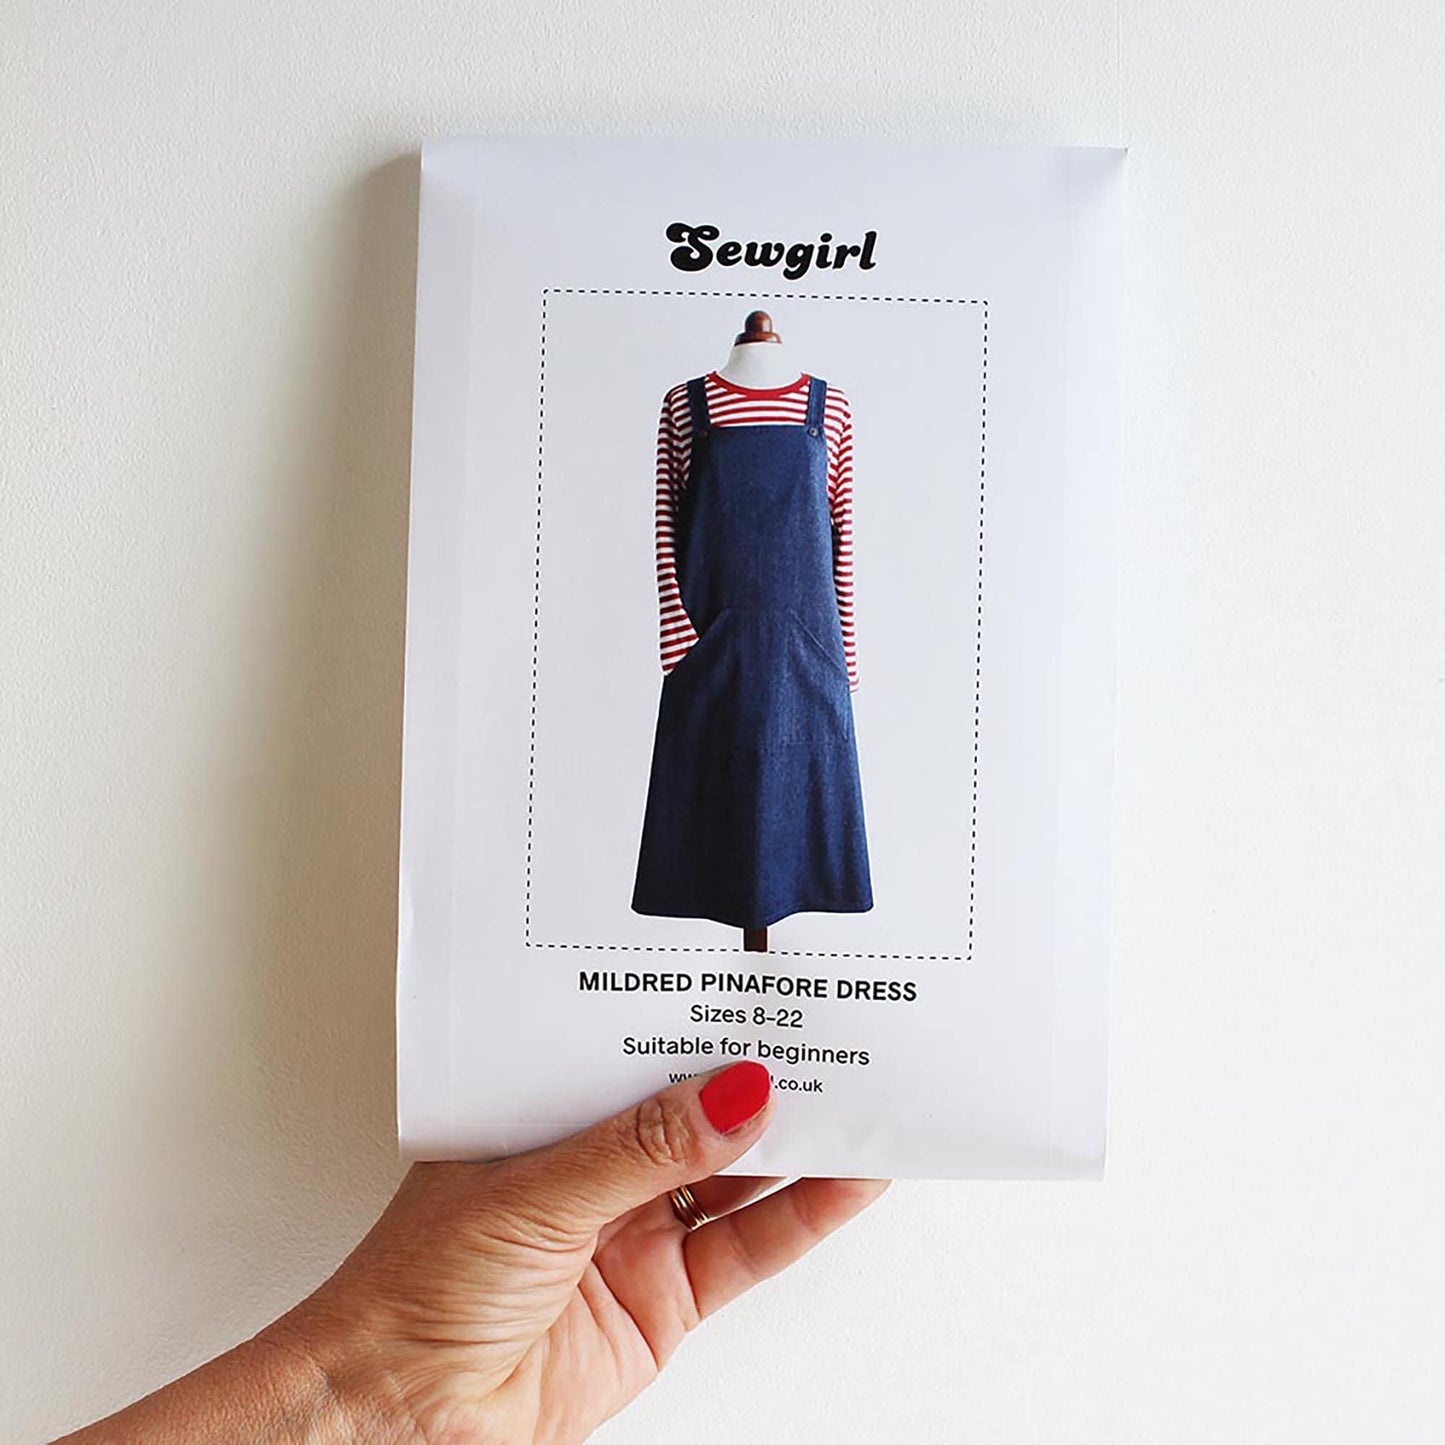 MILDRED PINAFORE sewing pattern